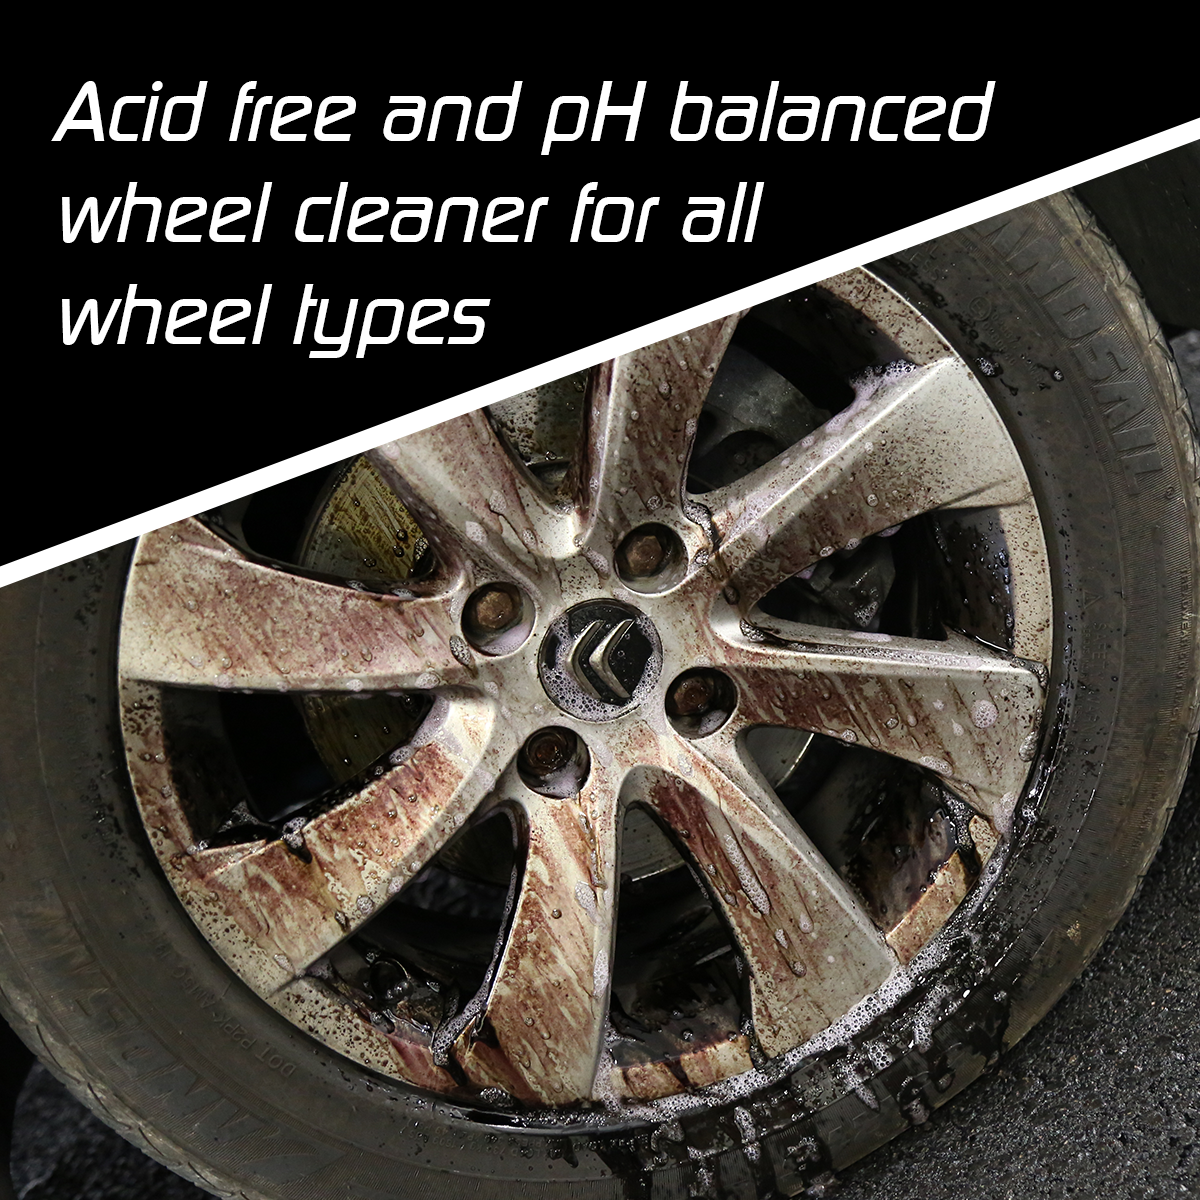 Acid free and pH balanced wheel cleaner for all wheel types